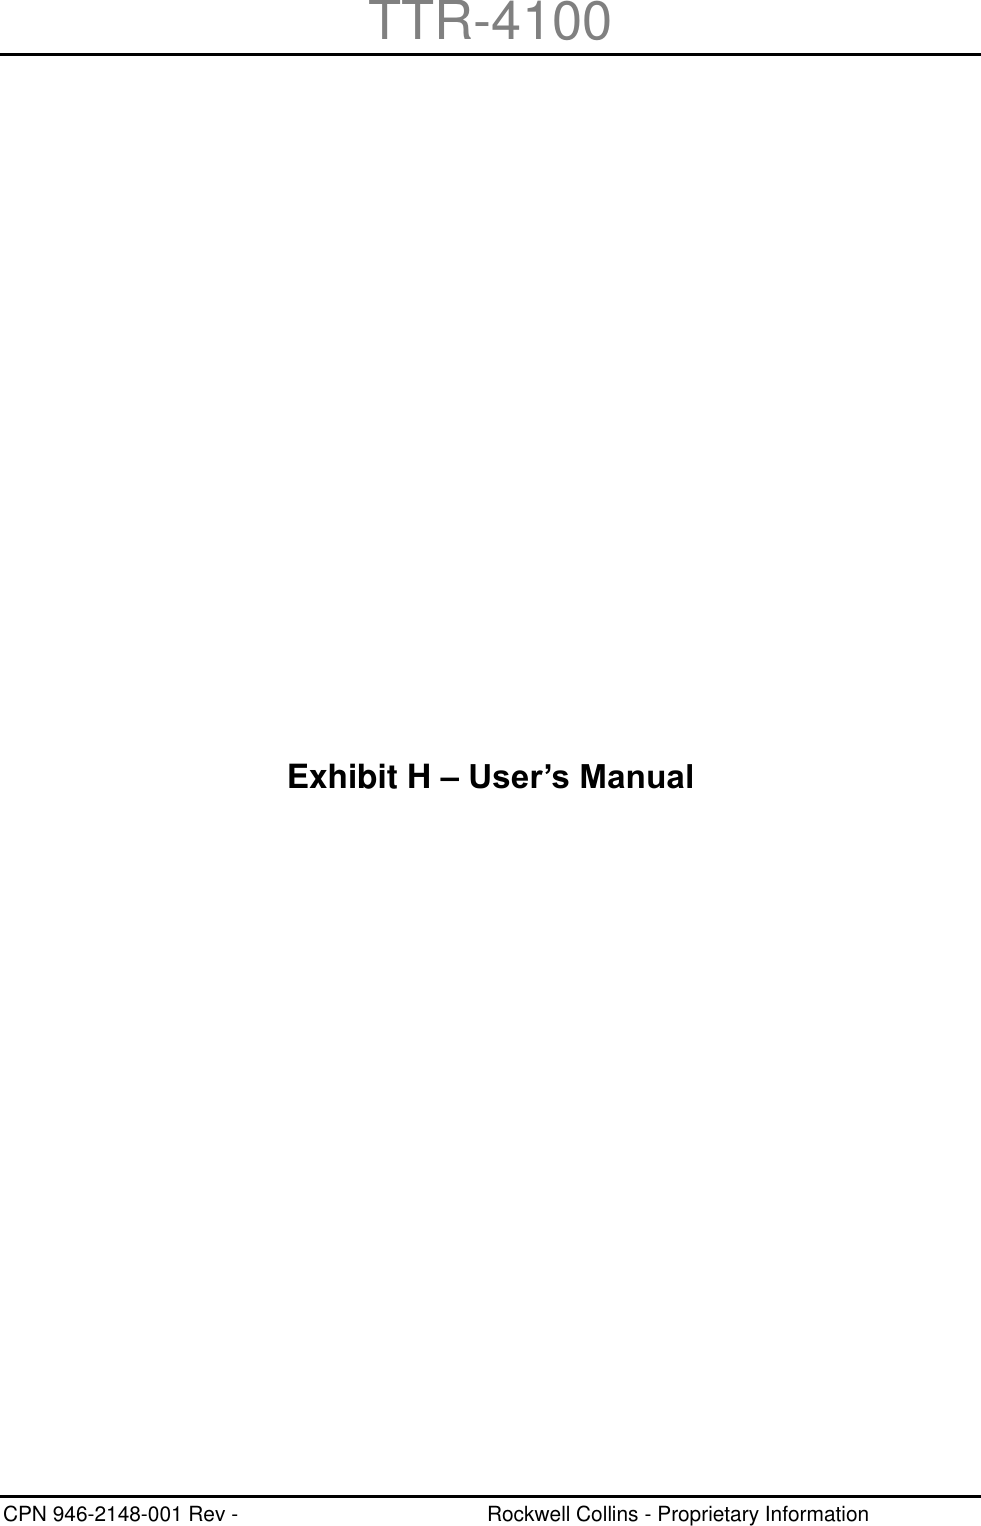 TTR-4100 CPN 946-2148-001 Rev -  Rockwell Collins - Proprietary Information  Page H-1 Exhibit H – User’s Manual 